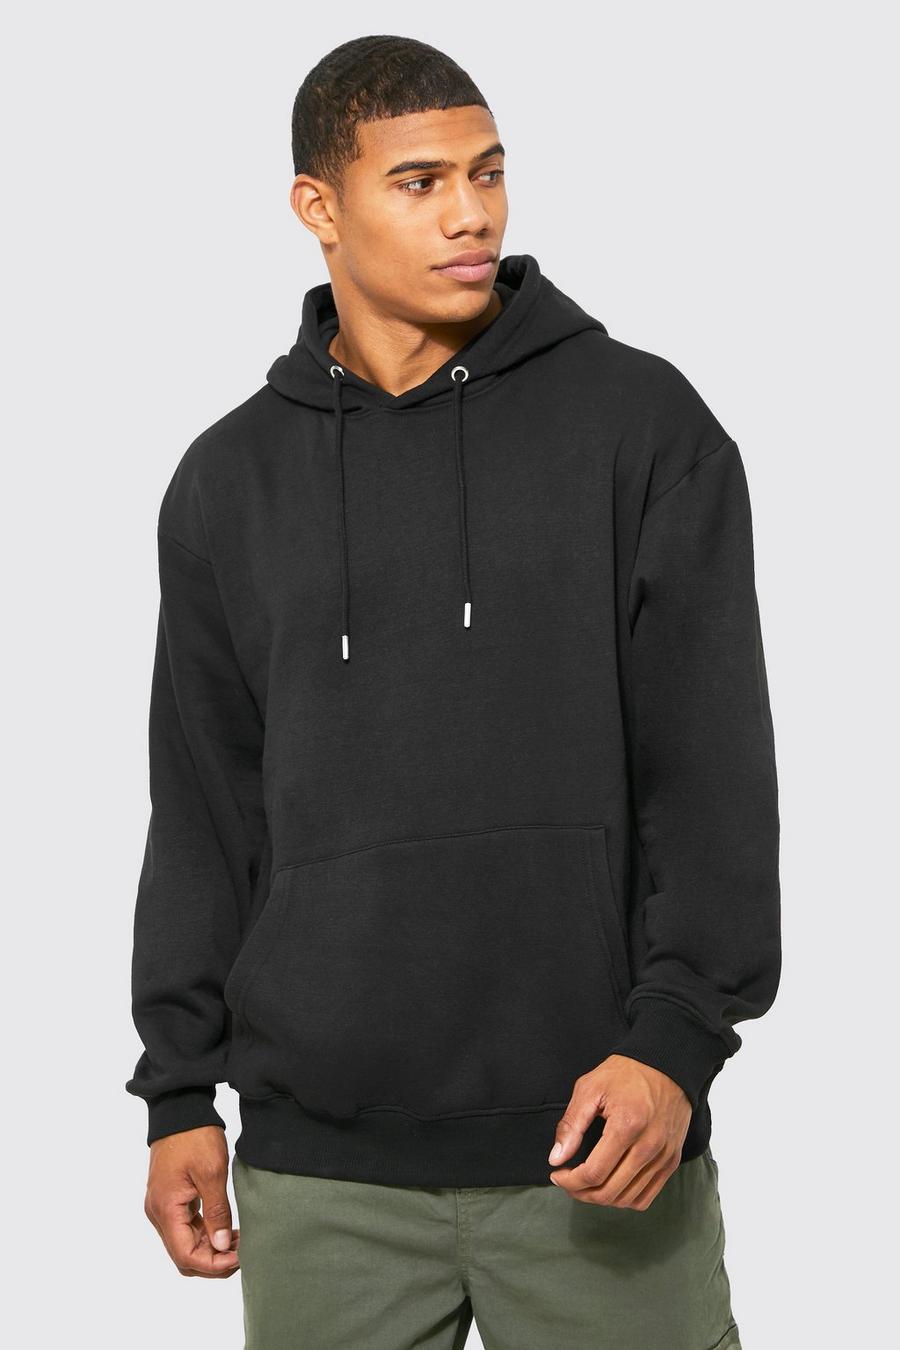 Black Basic Oversized Over The Head Hoodie